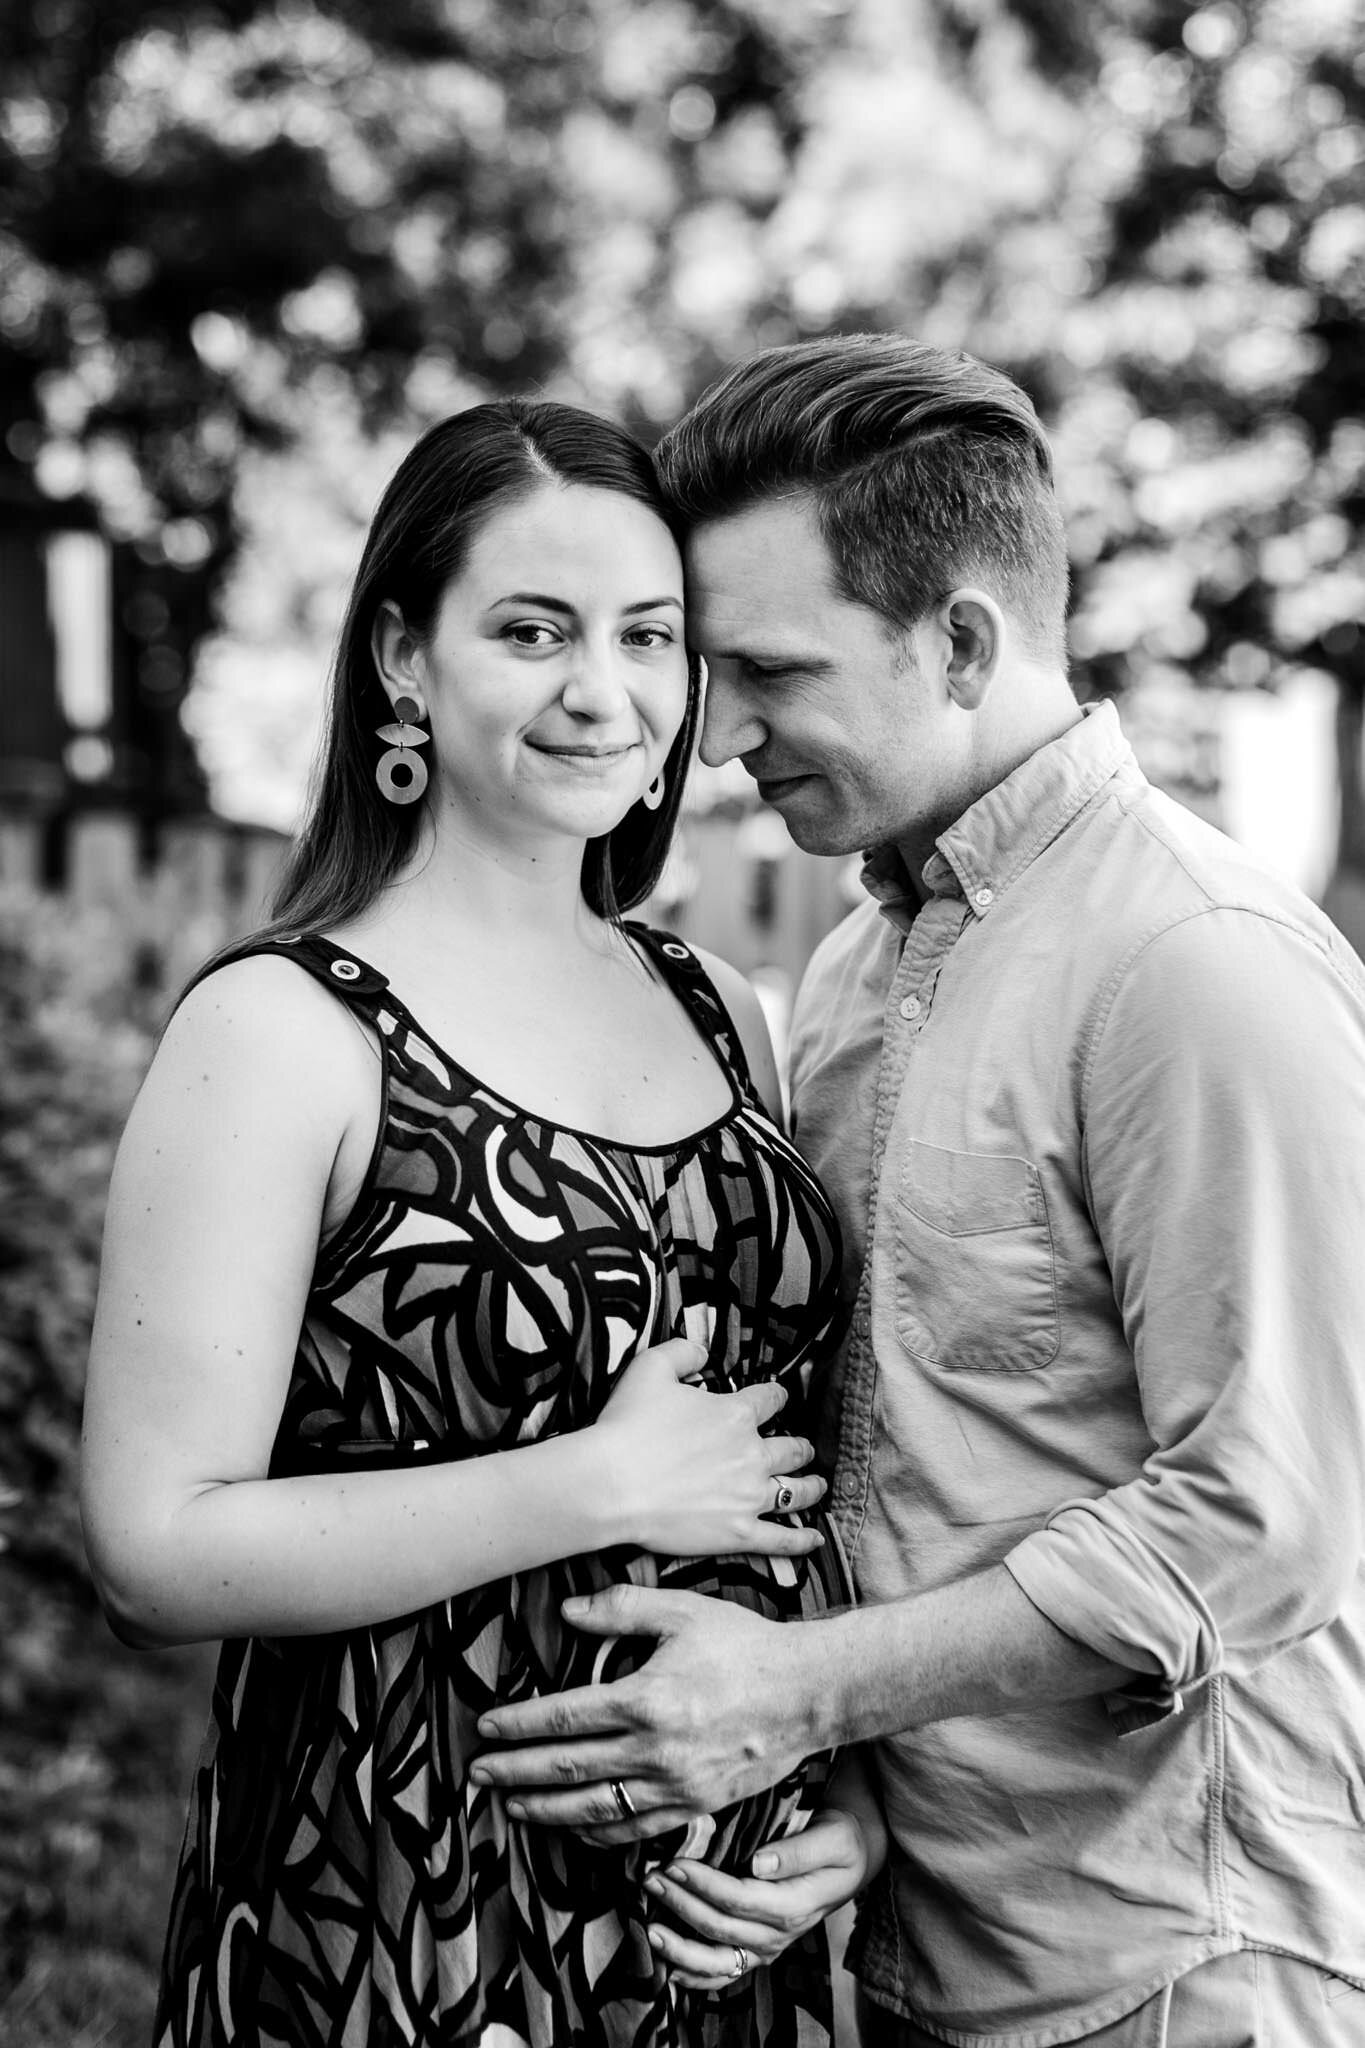 Durham Maternity Photographer | By G. Lin Photography | Beautiful black and white maternity photo of husband and wife